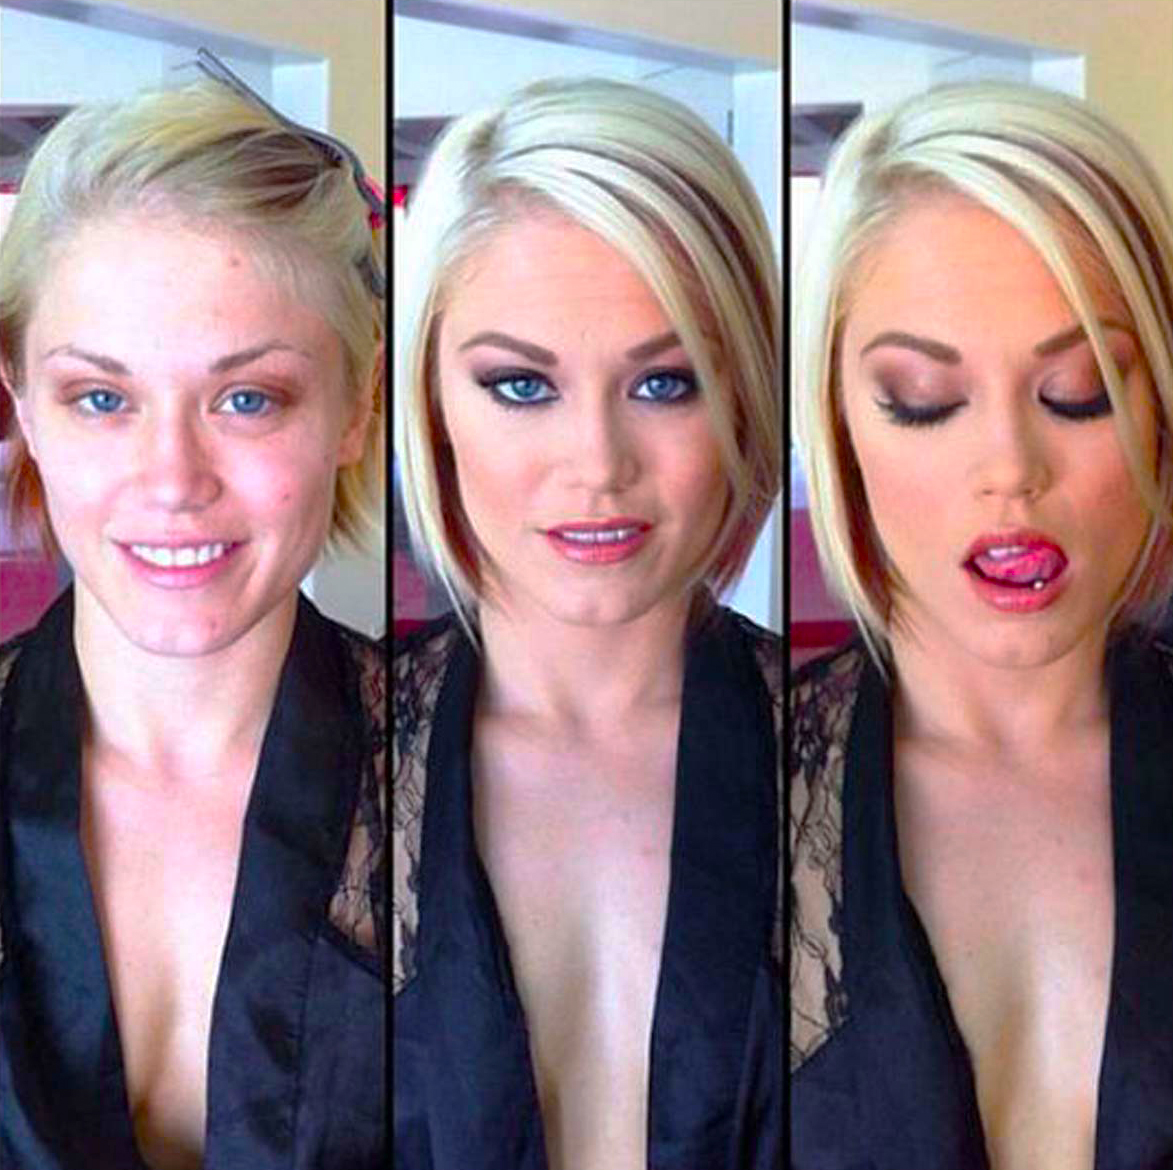 Porn stars wothout makeup